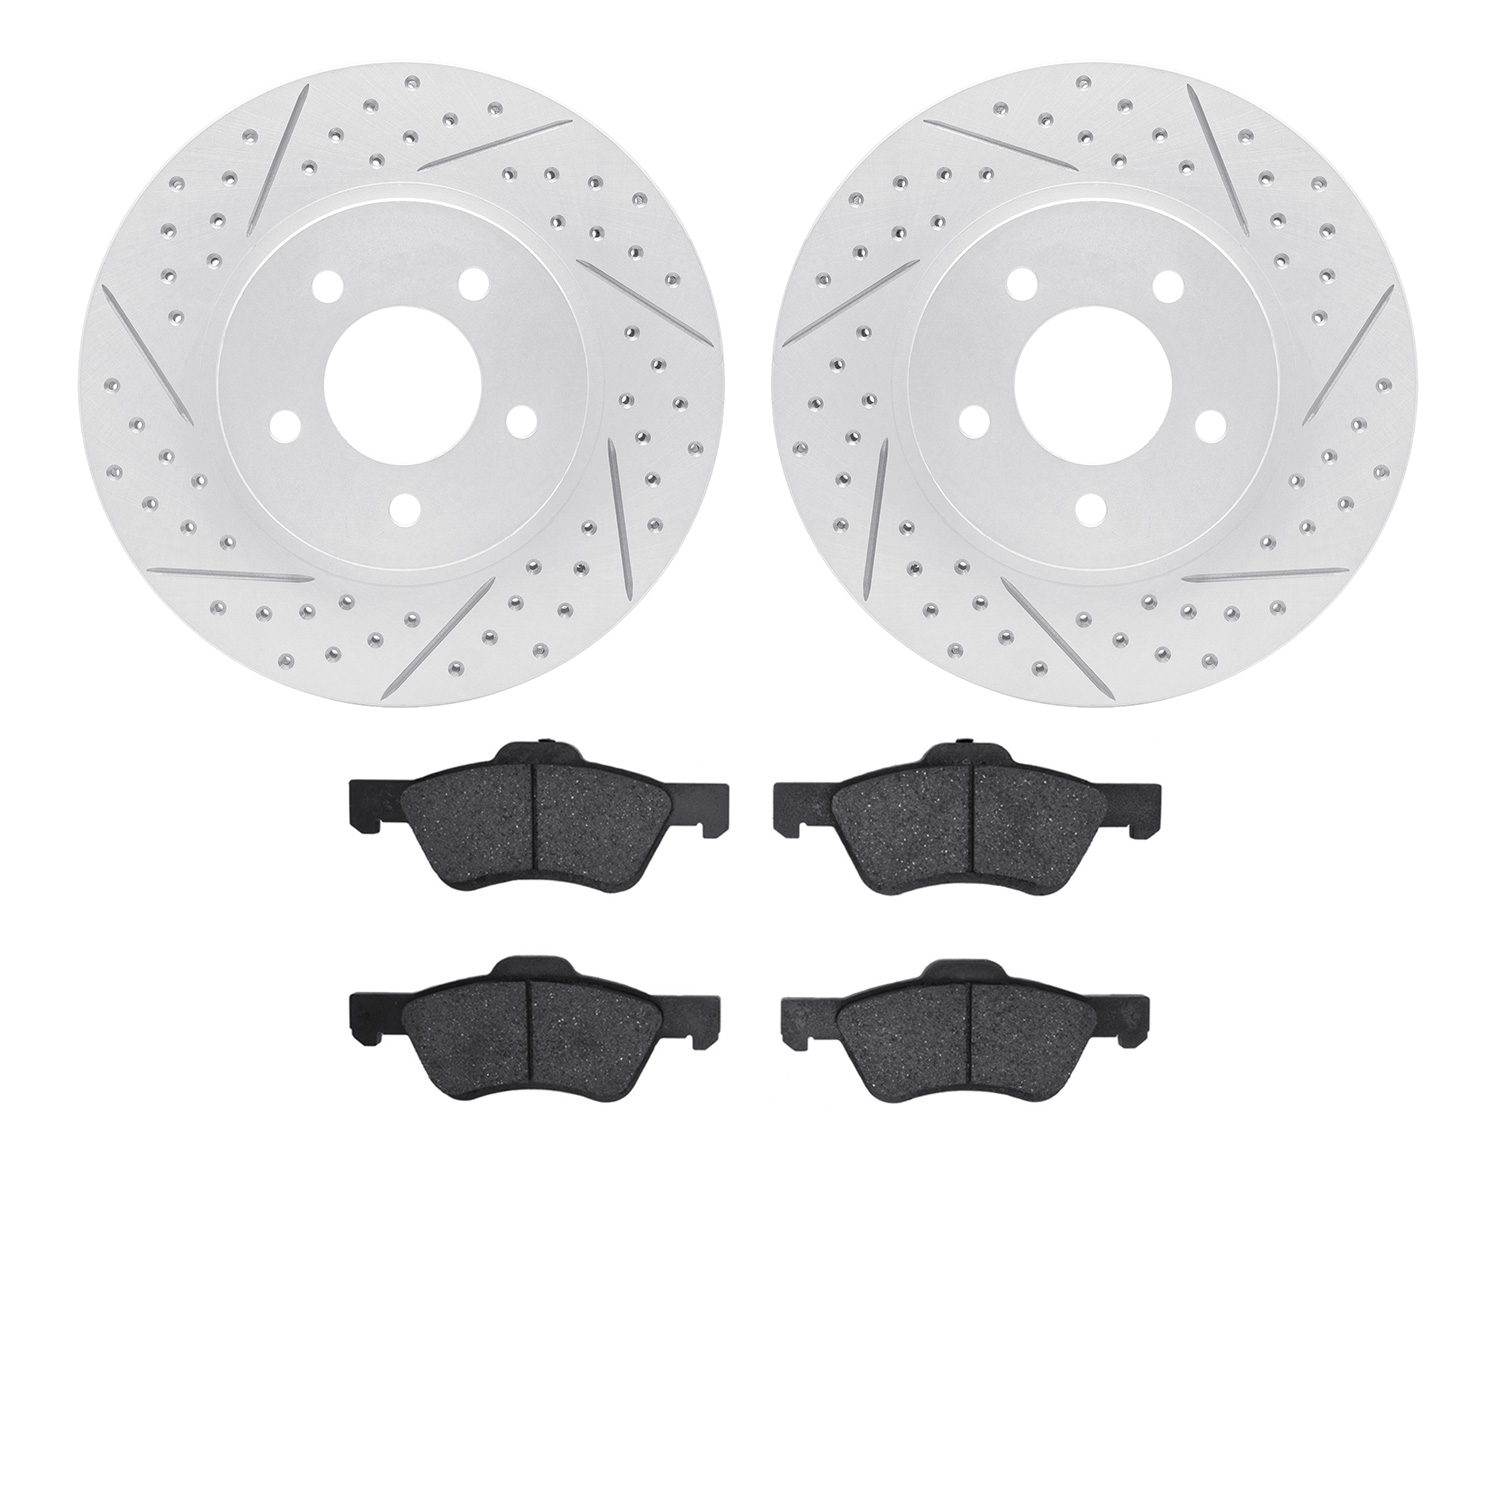 2502-54170 Geoperformance Drilled/Slotted Rotors w/5000 Advanced Brake Pads Kit, 2008-2012 Ford/Lincoln/Mercury/Mazda, Position: